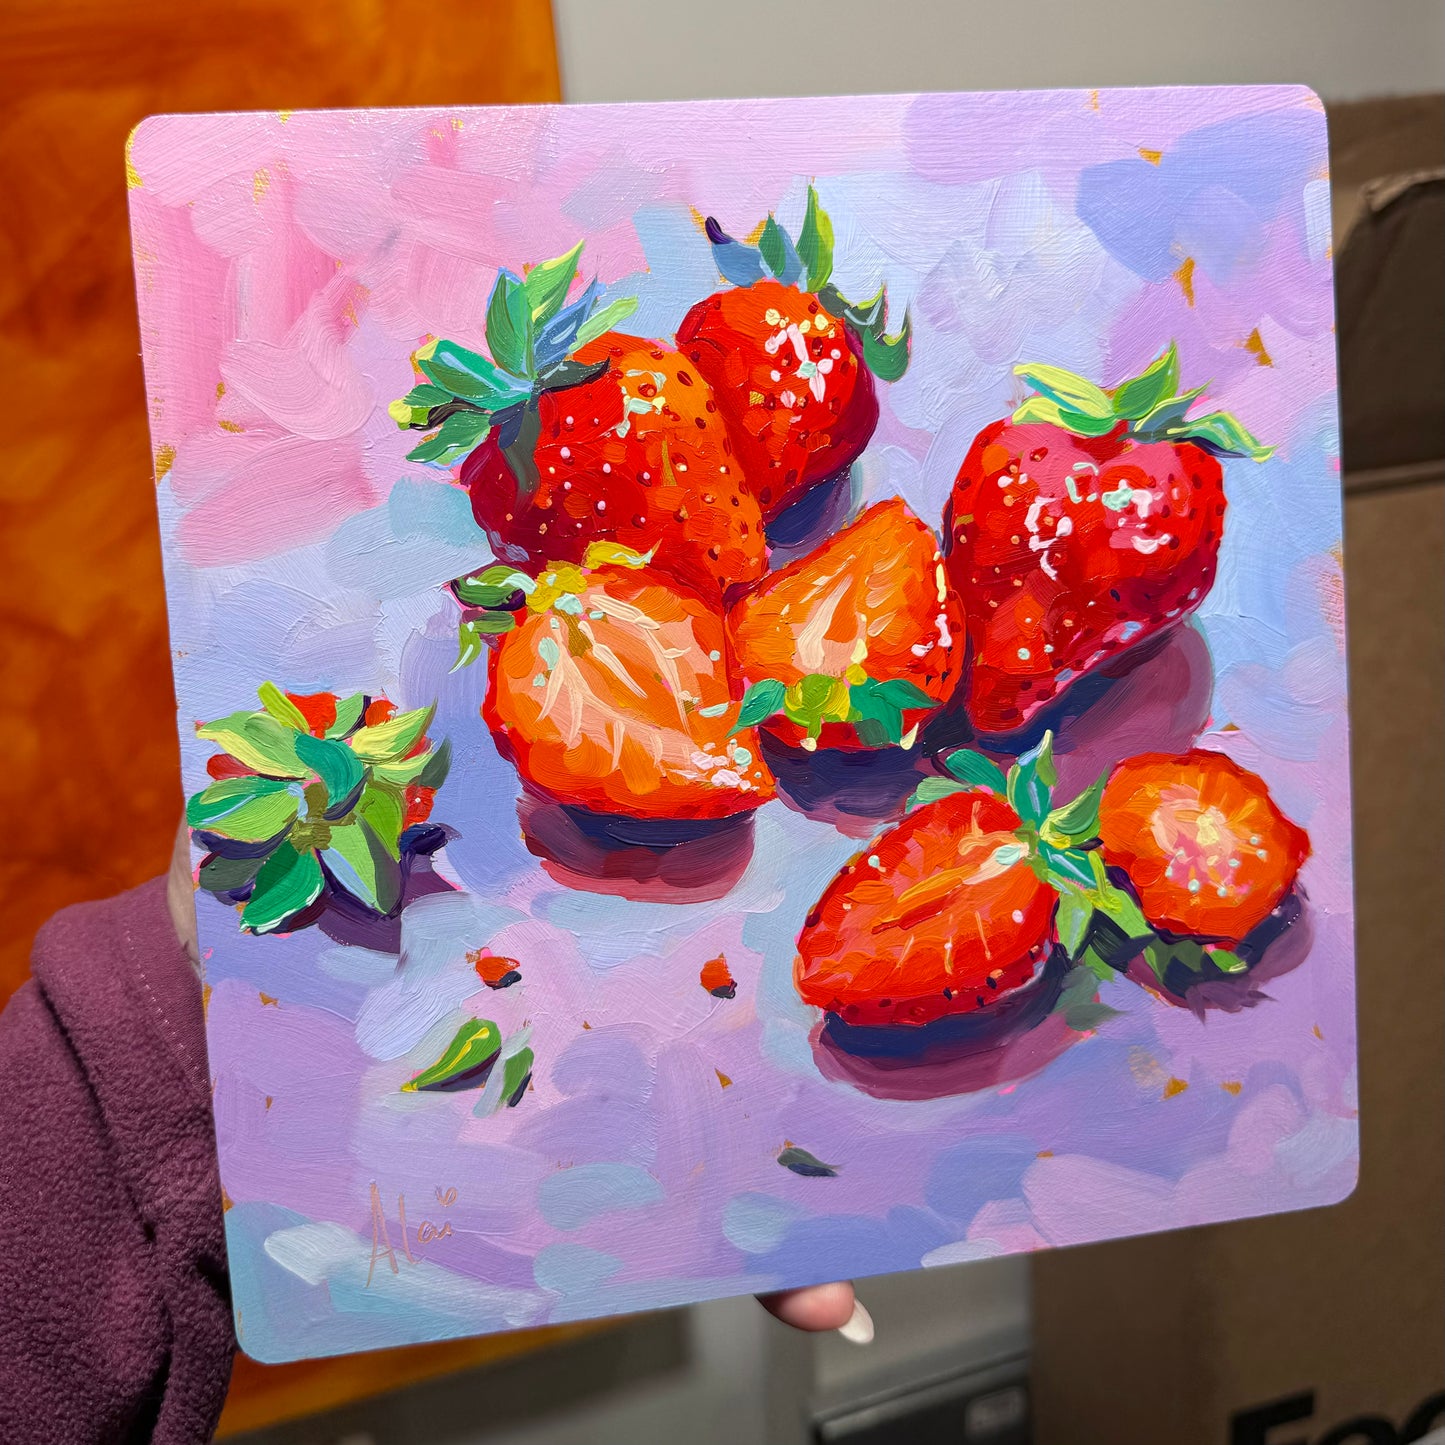 Sparkly strawberries - Original Oil Painting